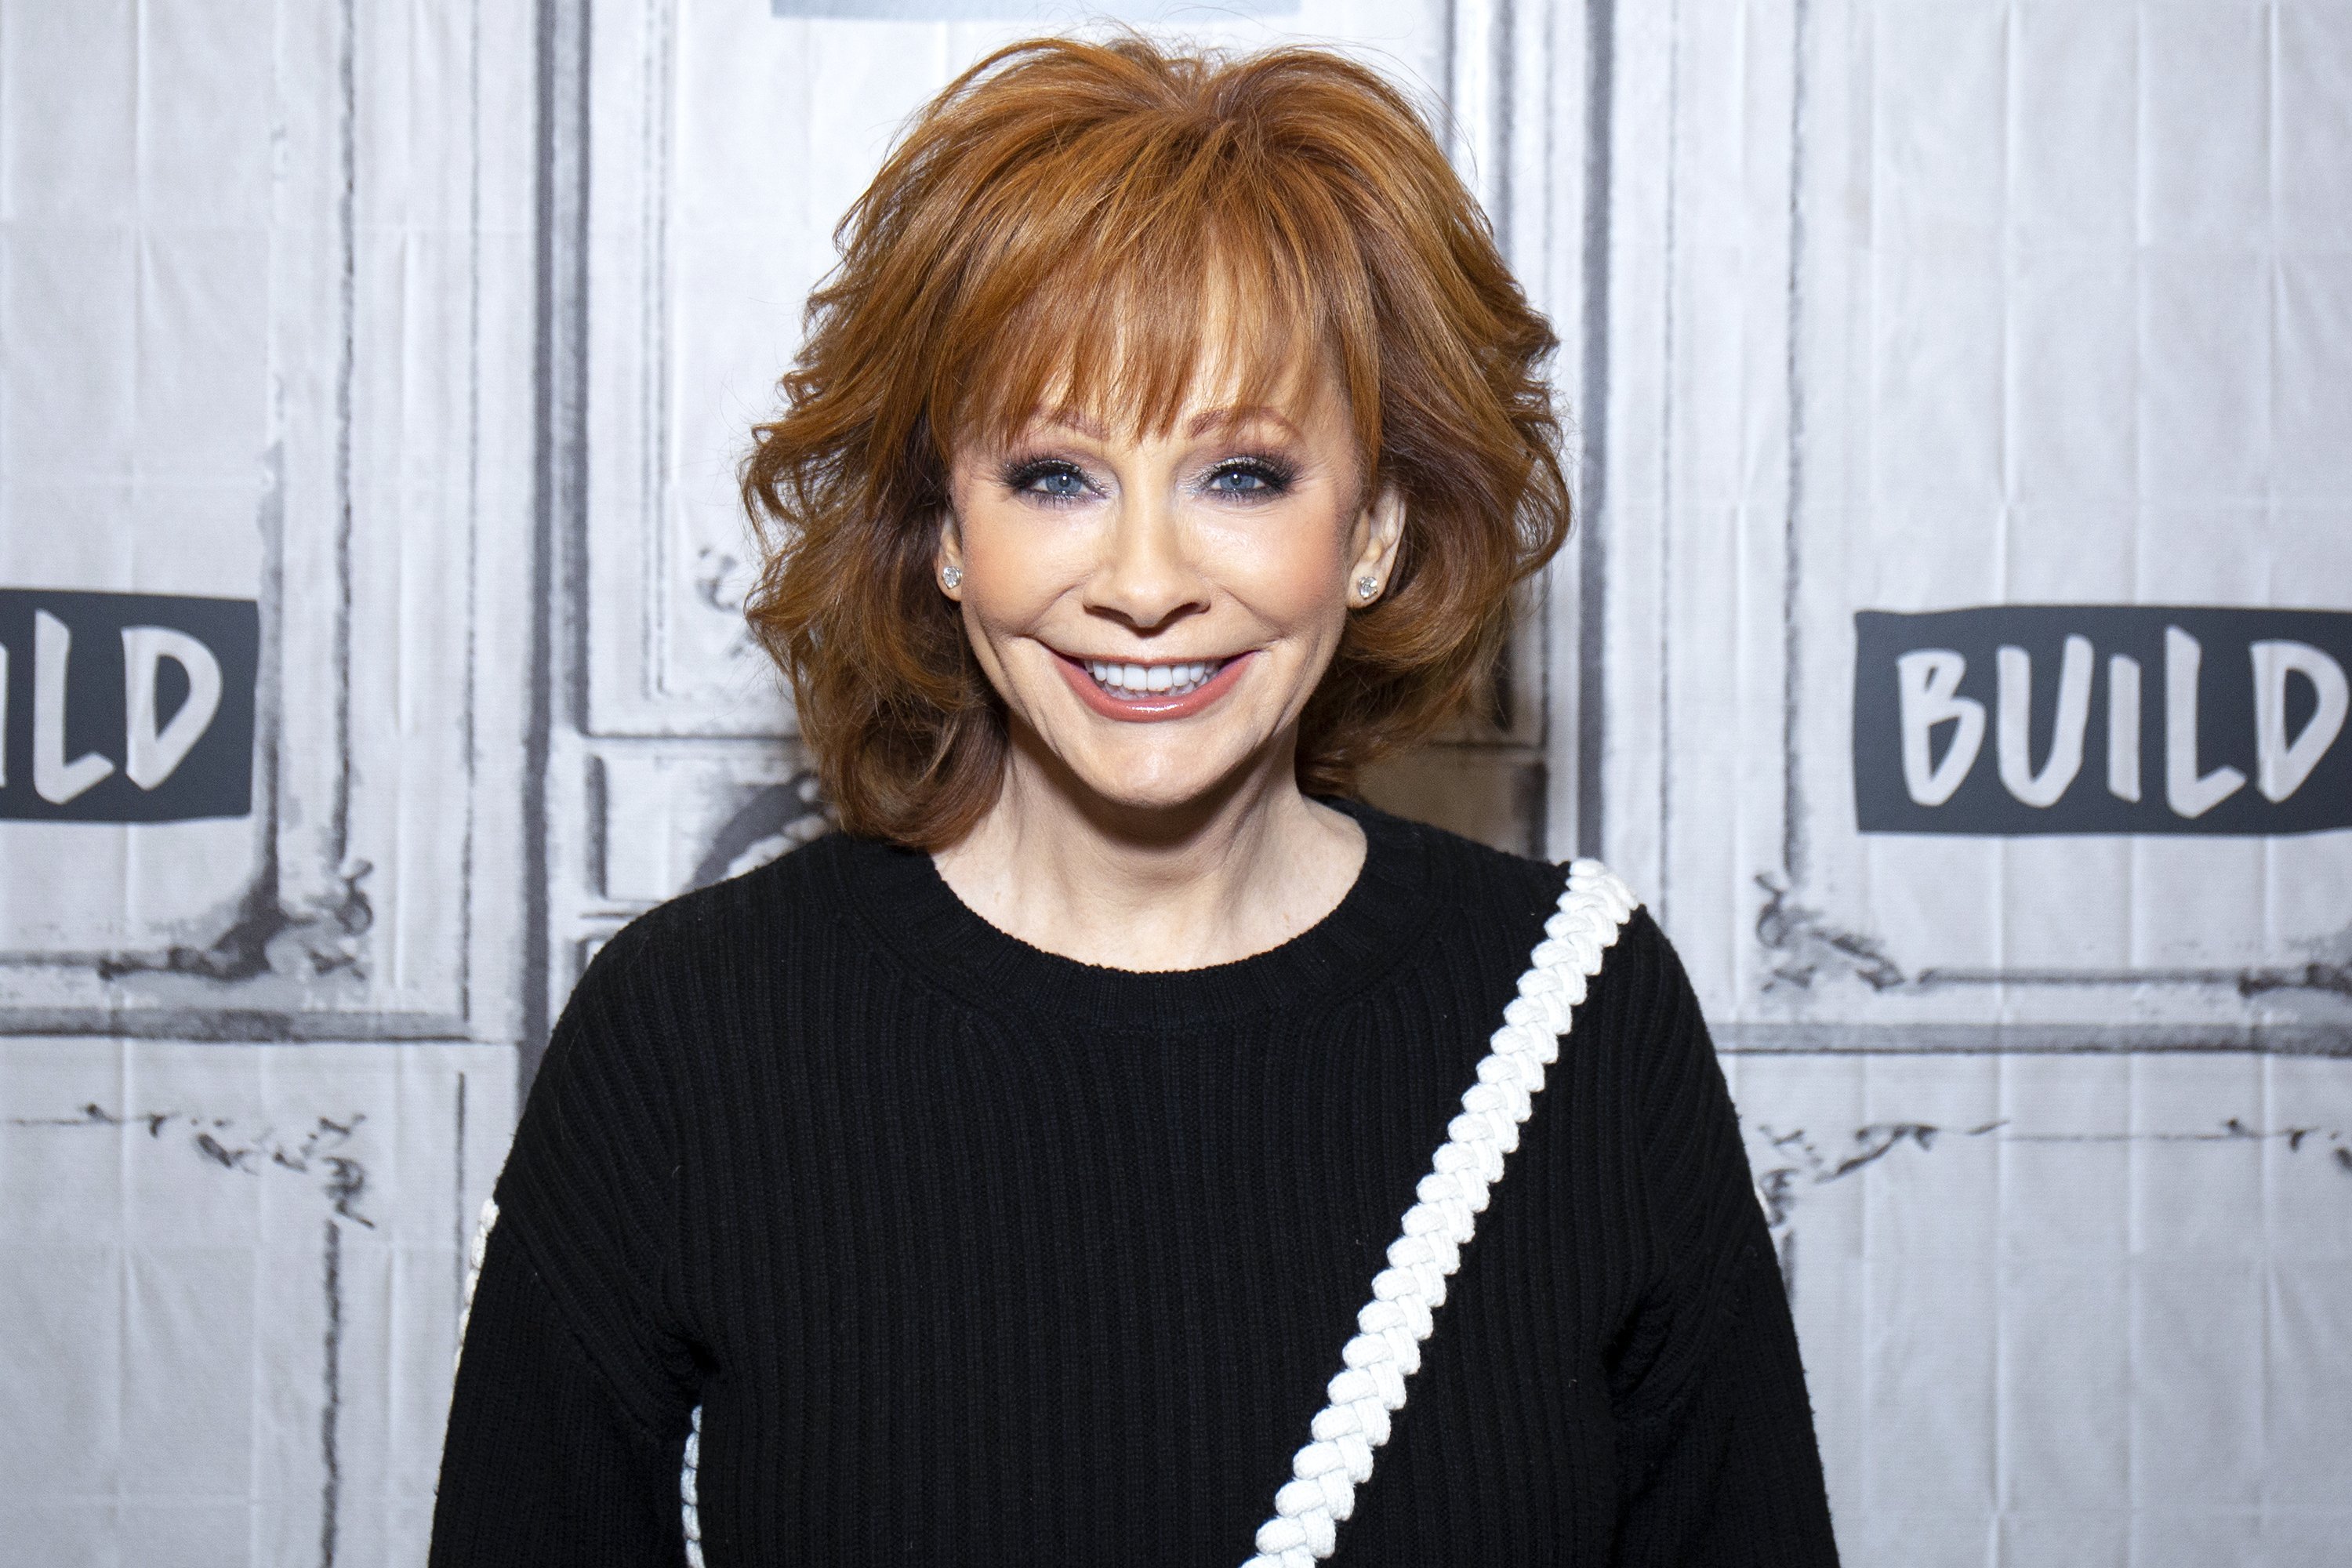 Reba McEntire at the Build Studio on February 20, 2019 in New York City | Photo: Getty Images